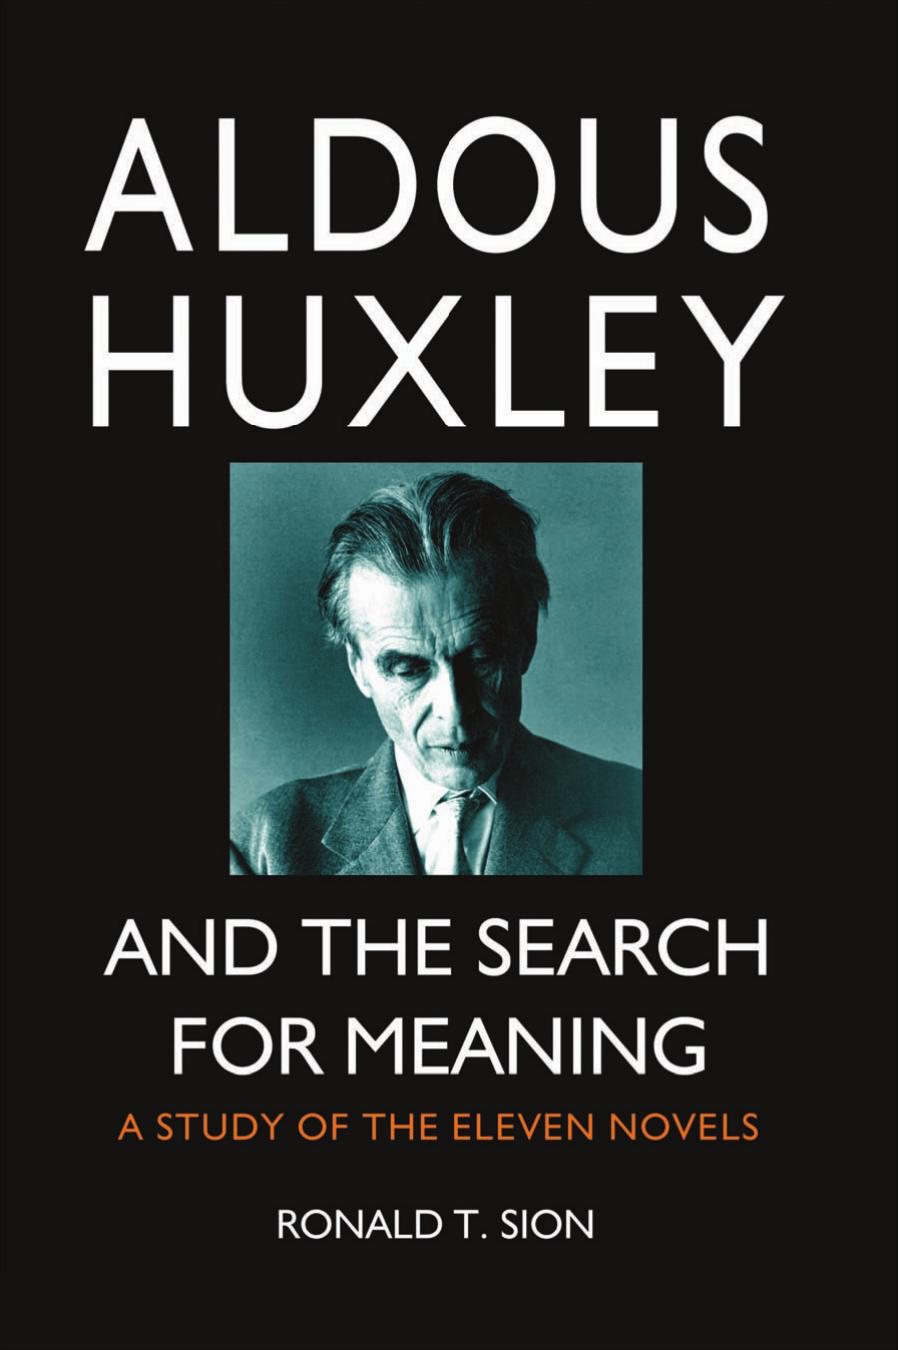 Aldous Huxley and the Search for Meaning